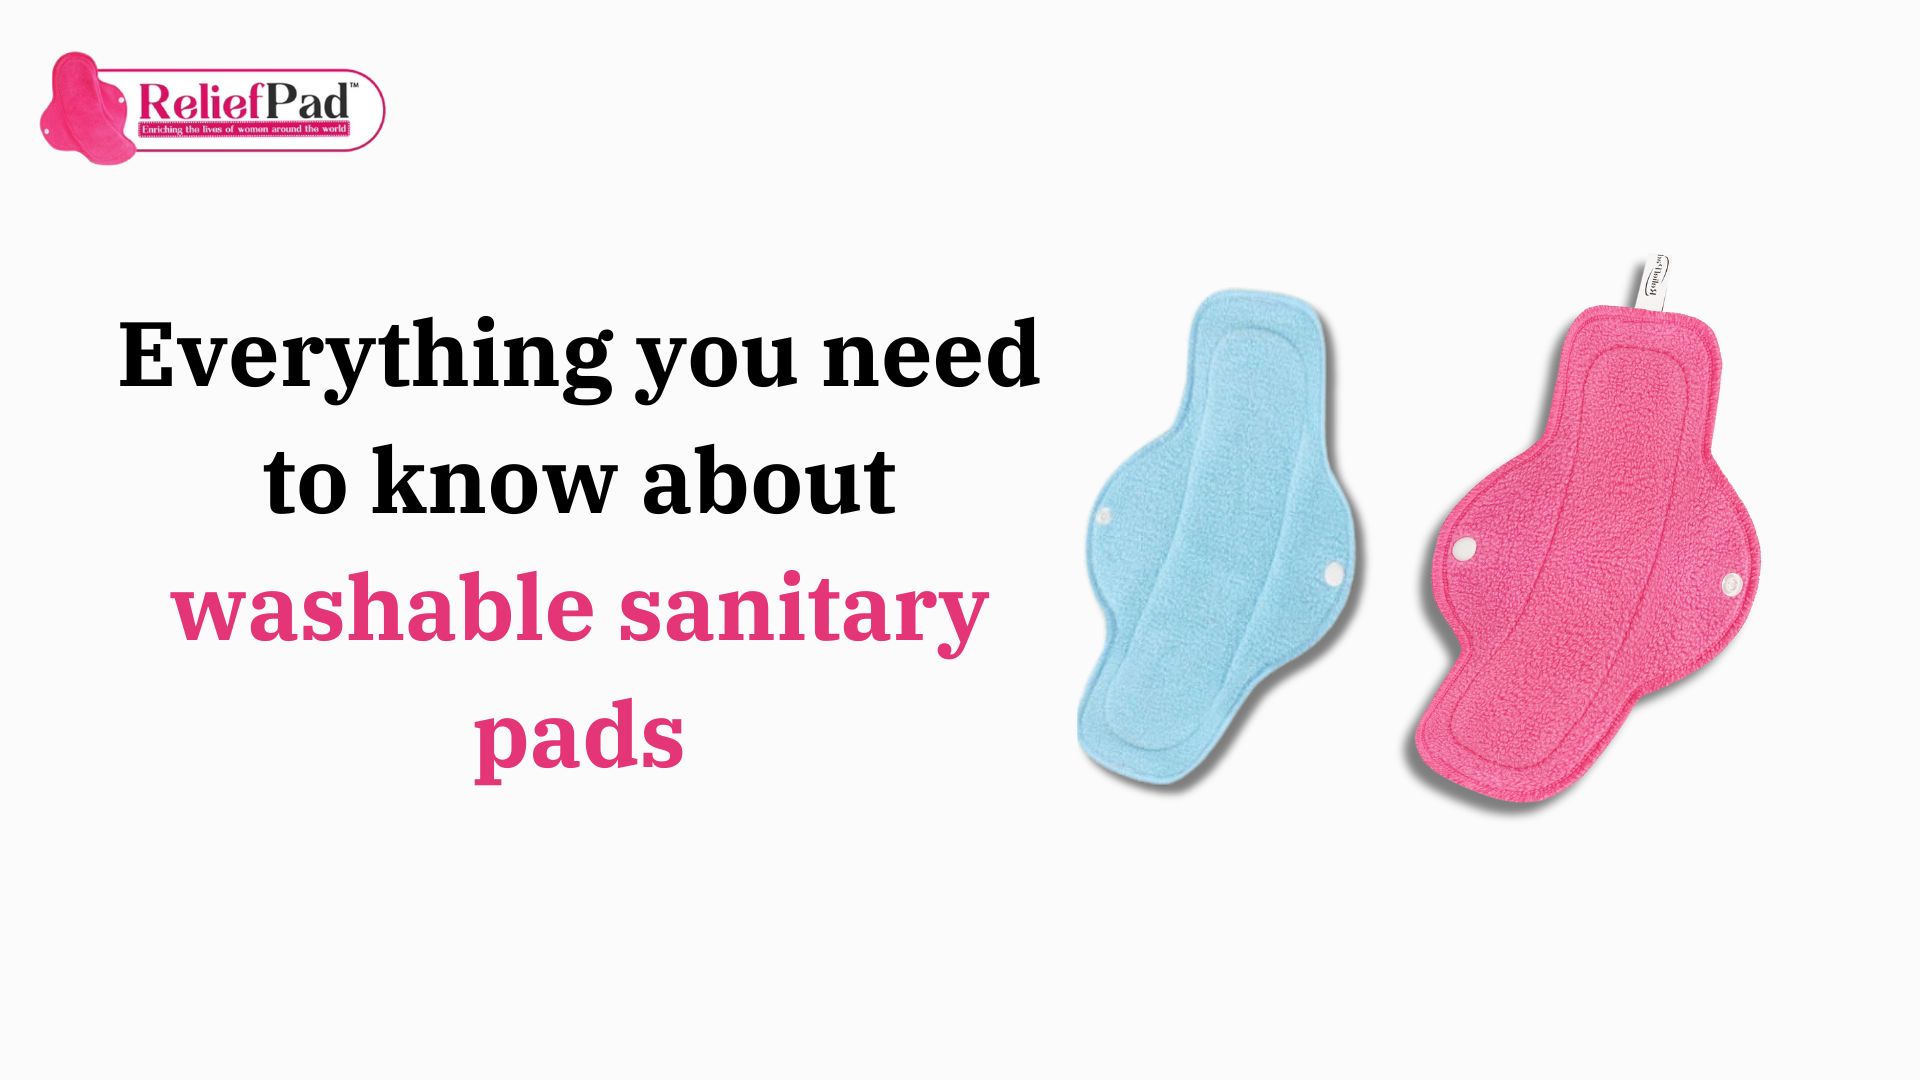 Everything you need to know about washable sanitary pads
